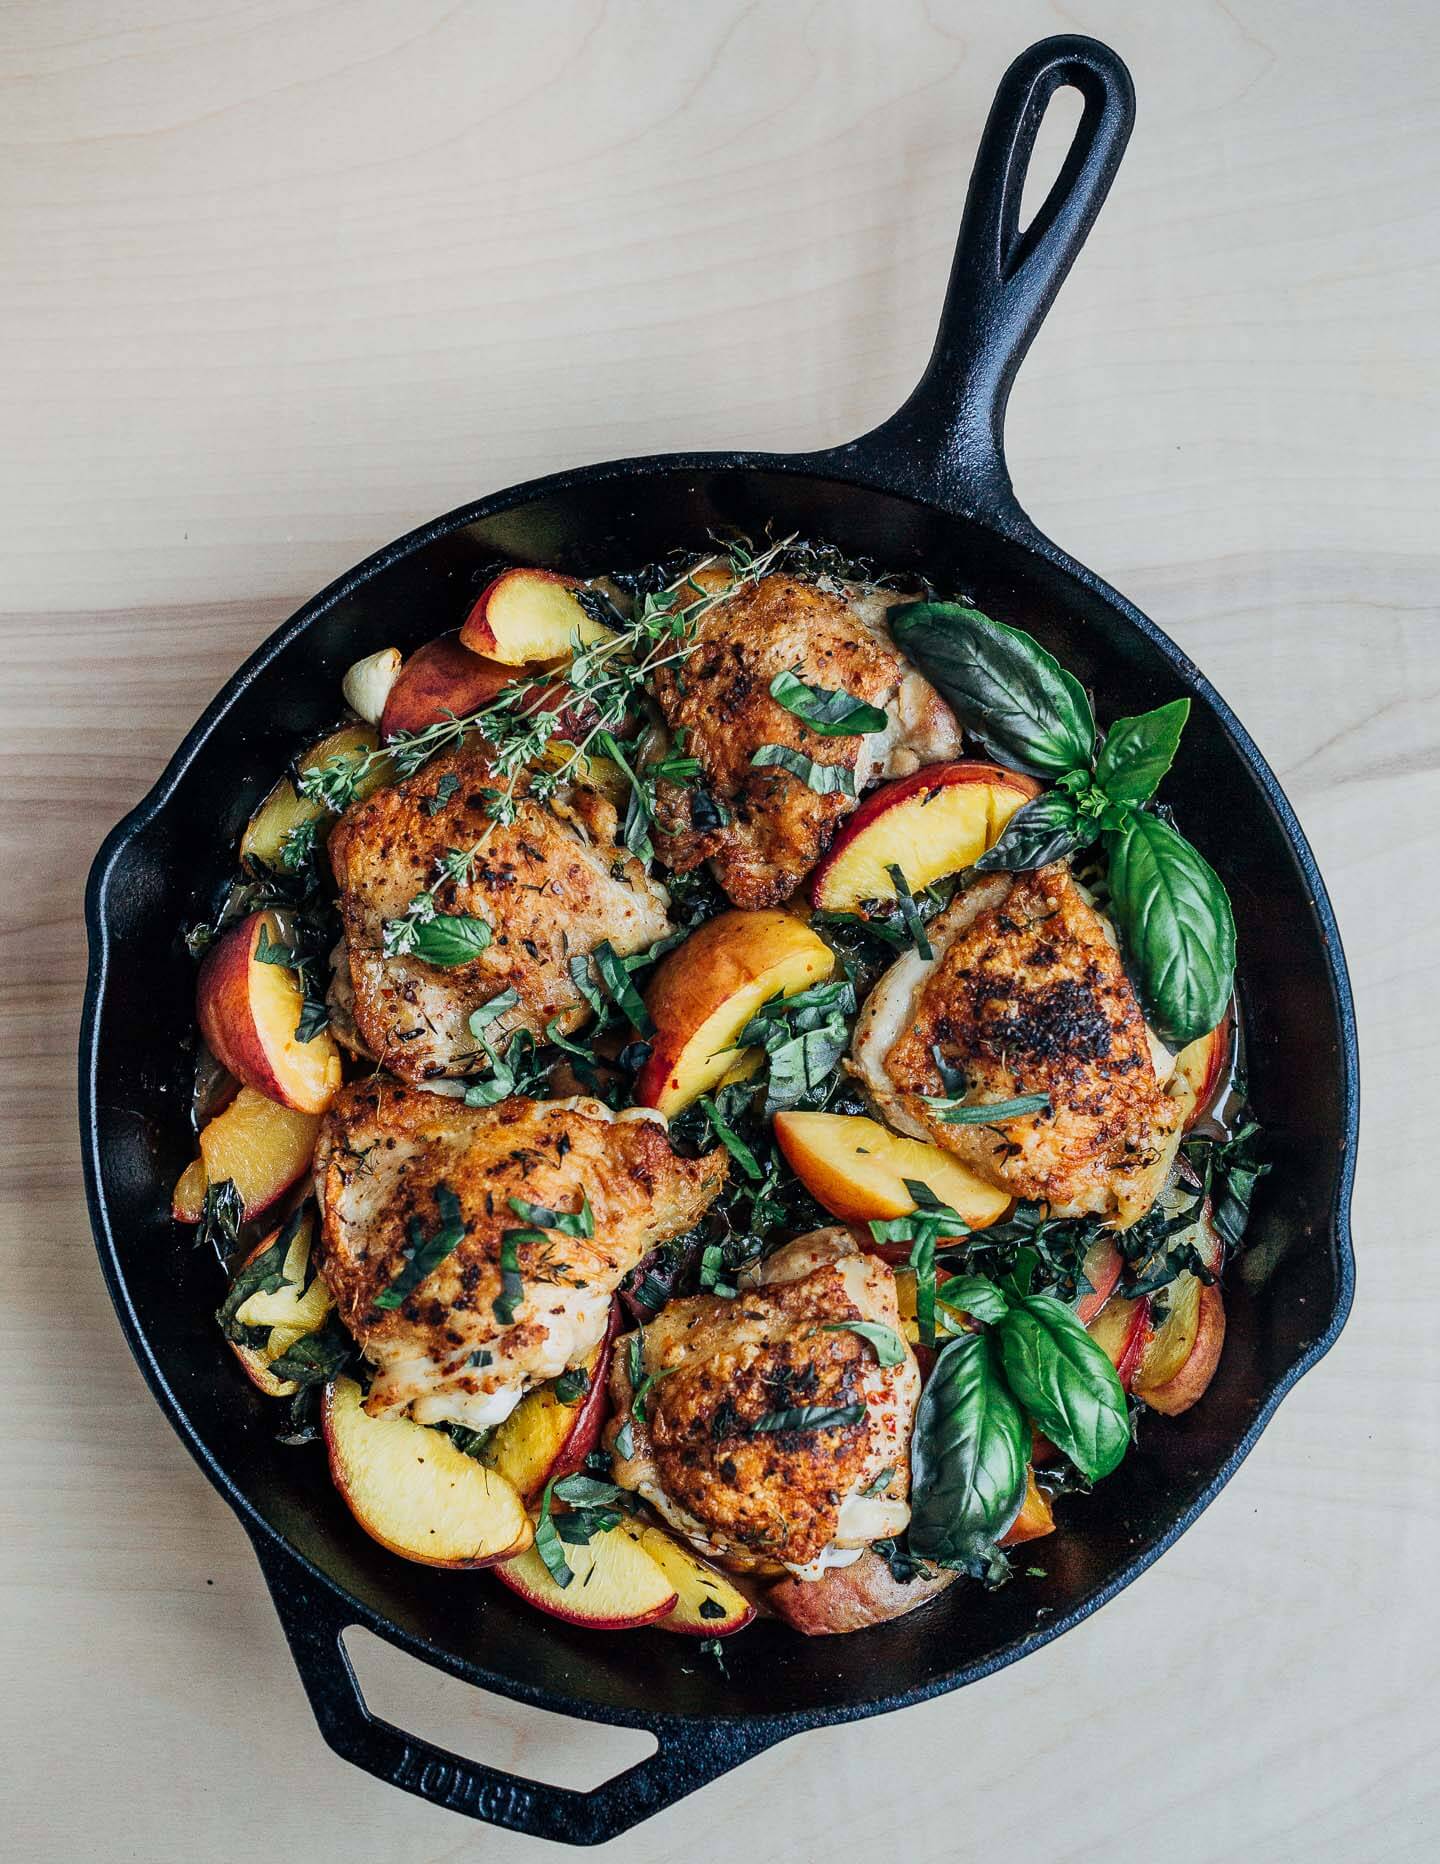 A skillet with golden chicken, peaches, and herbs.